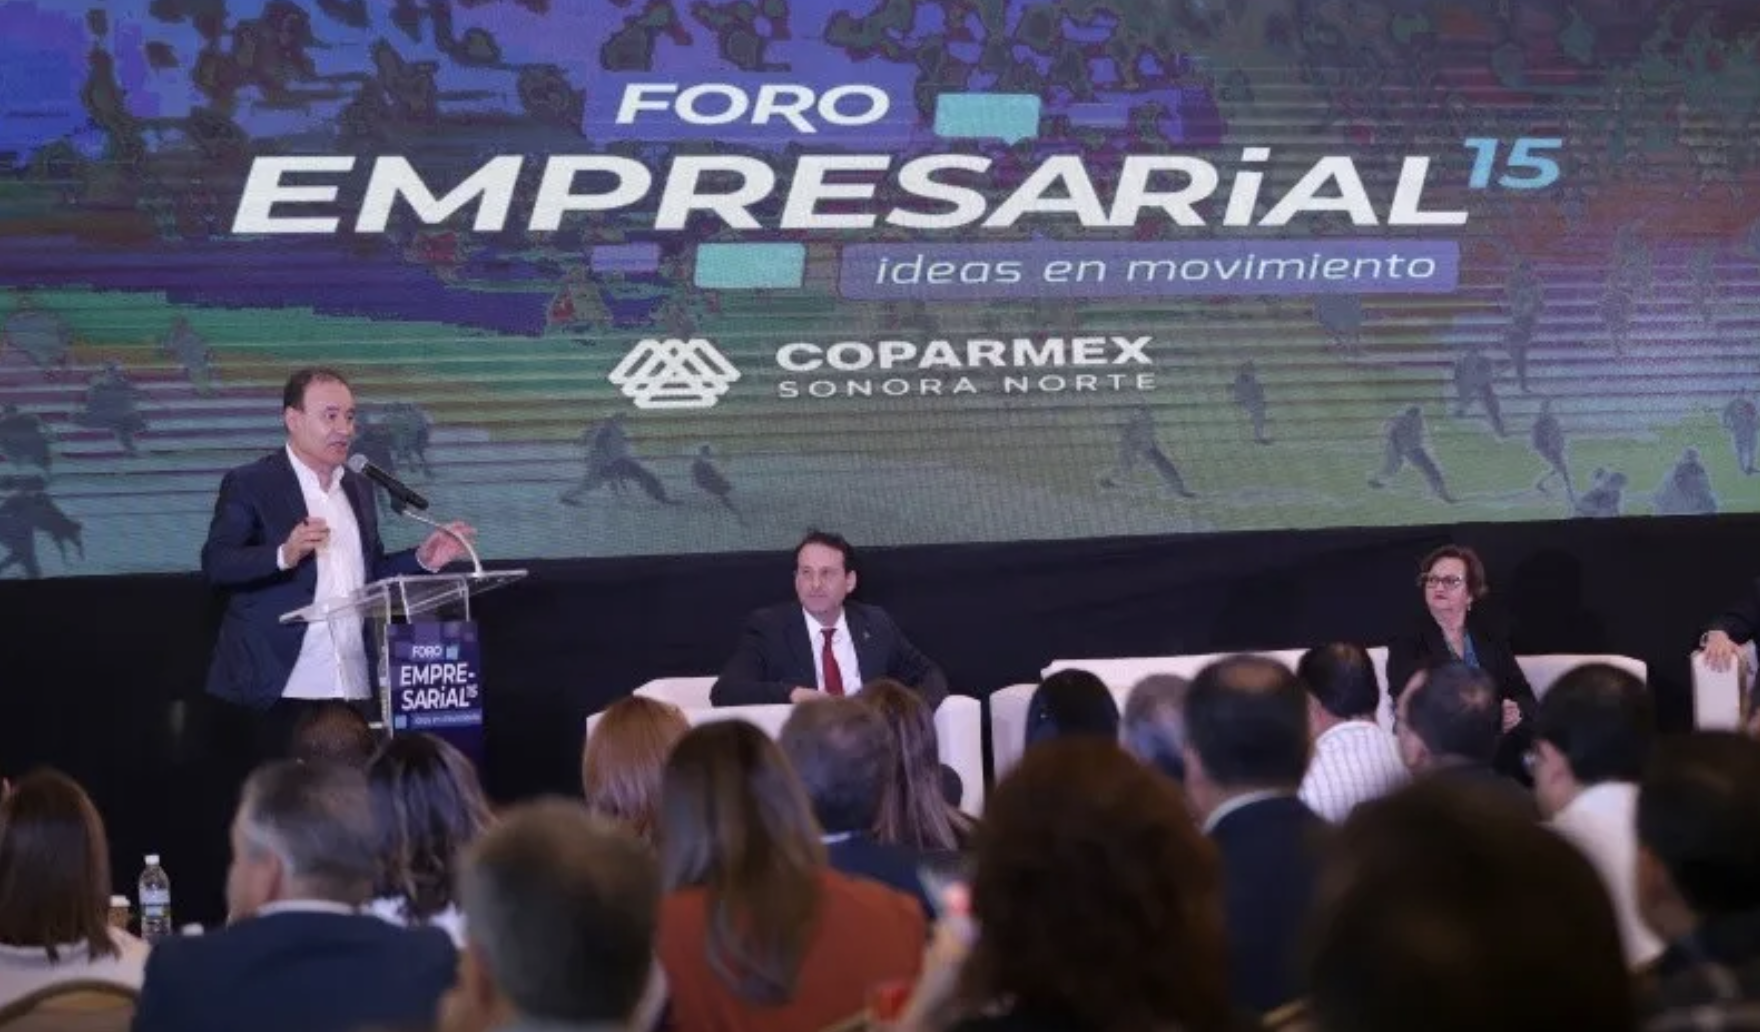 THEY SHARE IDEAS IN THE COPARMEX SONORA NORTE BUSINESS FORUM